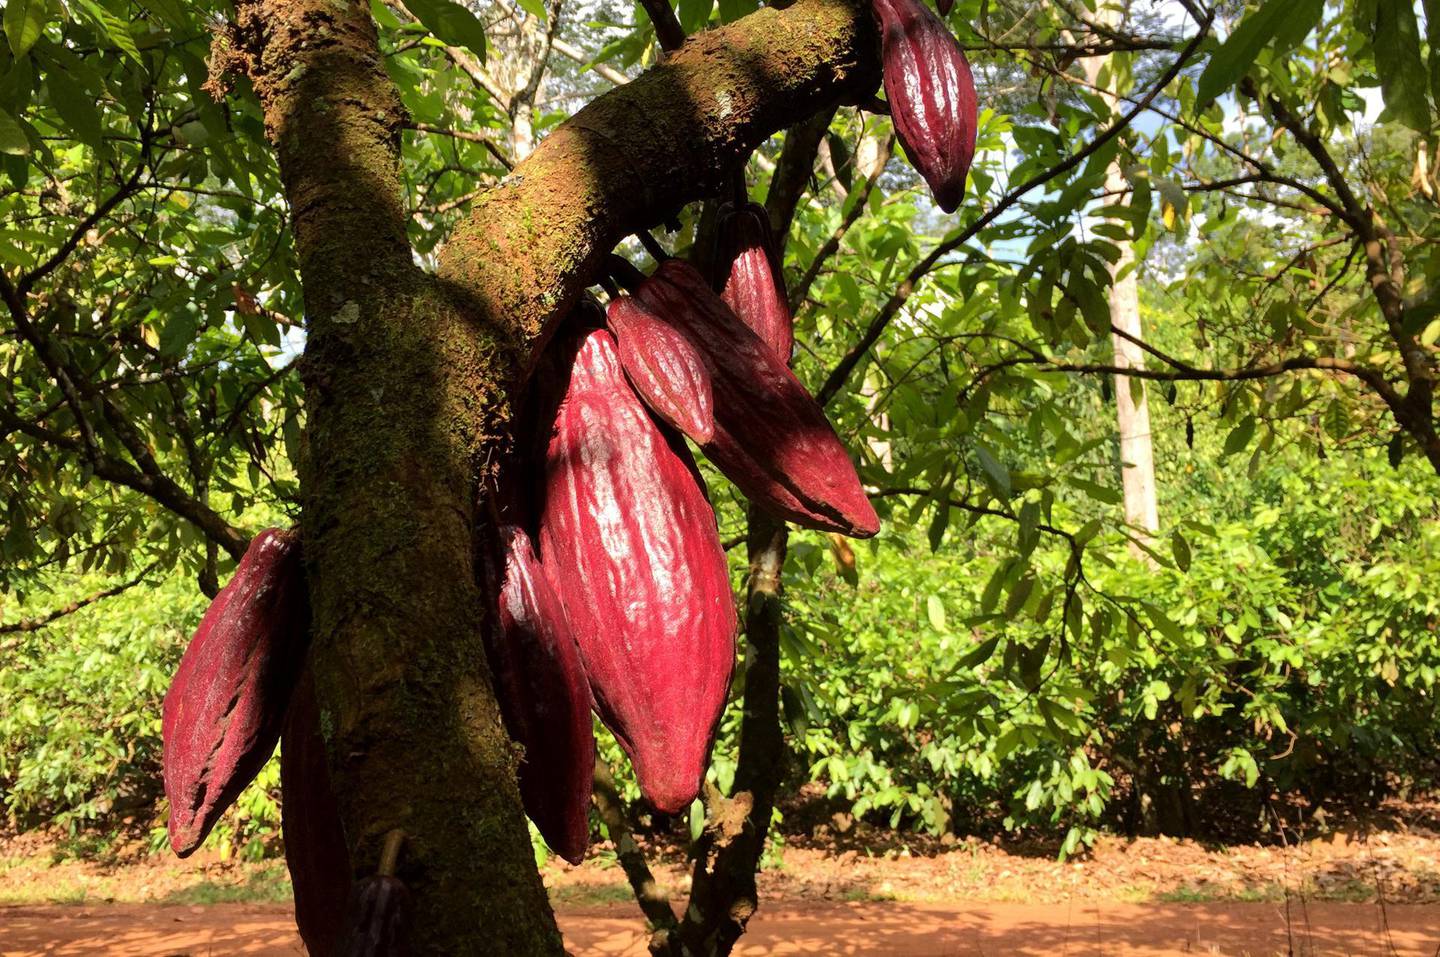 A cocoa tree bearing fruit is seen in a plantation in a farm in Medicilandia, Para state, Brazil, March 19, 2018. Picture taken March 19, 2018. REUTERS/Marcelo Texeira